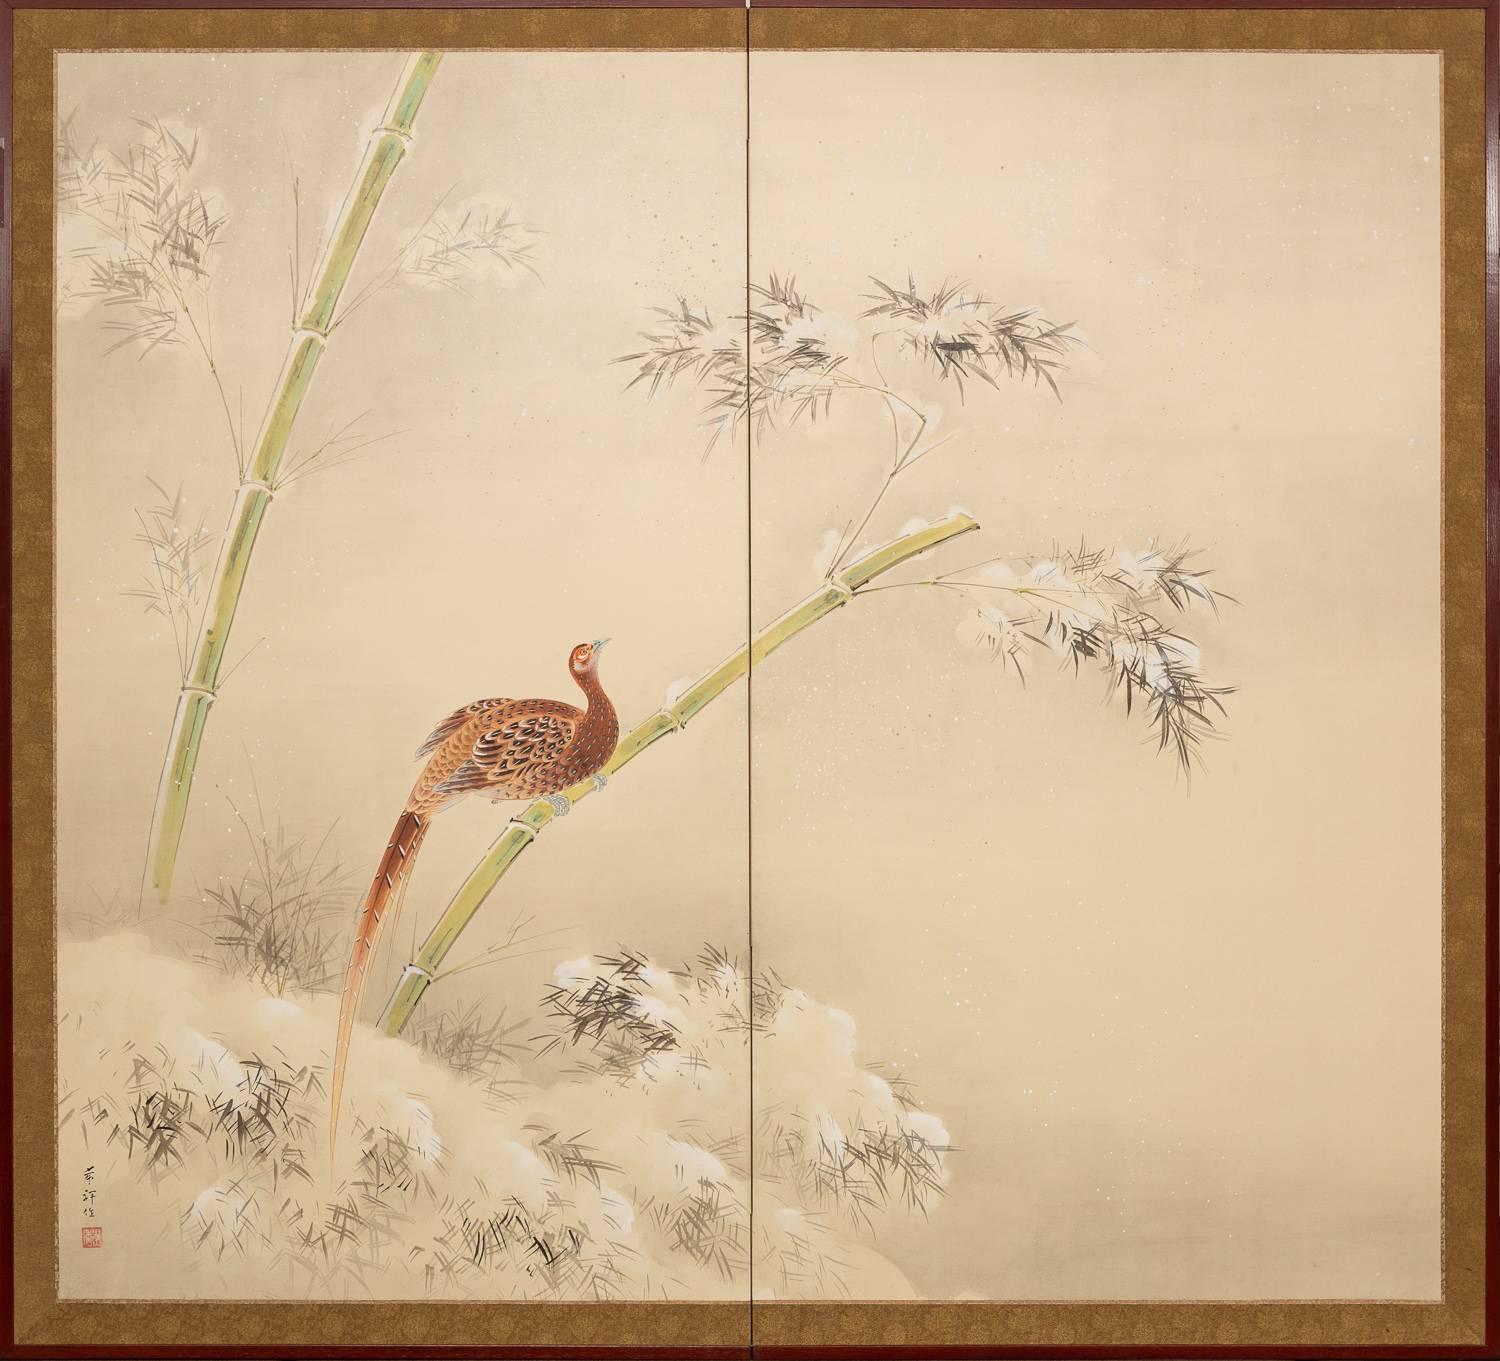 Early Taisho period painting (1912 - 1926) in mineral pigments on mulberry paper with a silk brocade border.  Artist signature reads: Kisho saku.  Kisho Shibahara (1885-1954). 